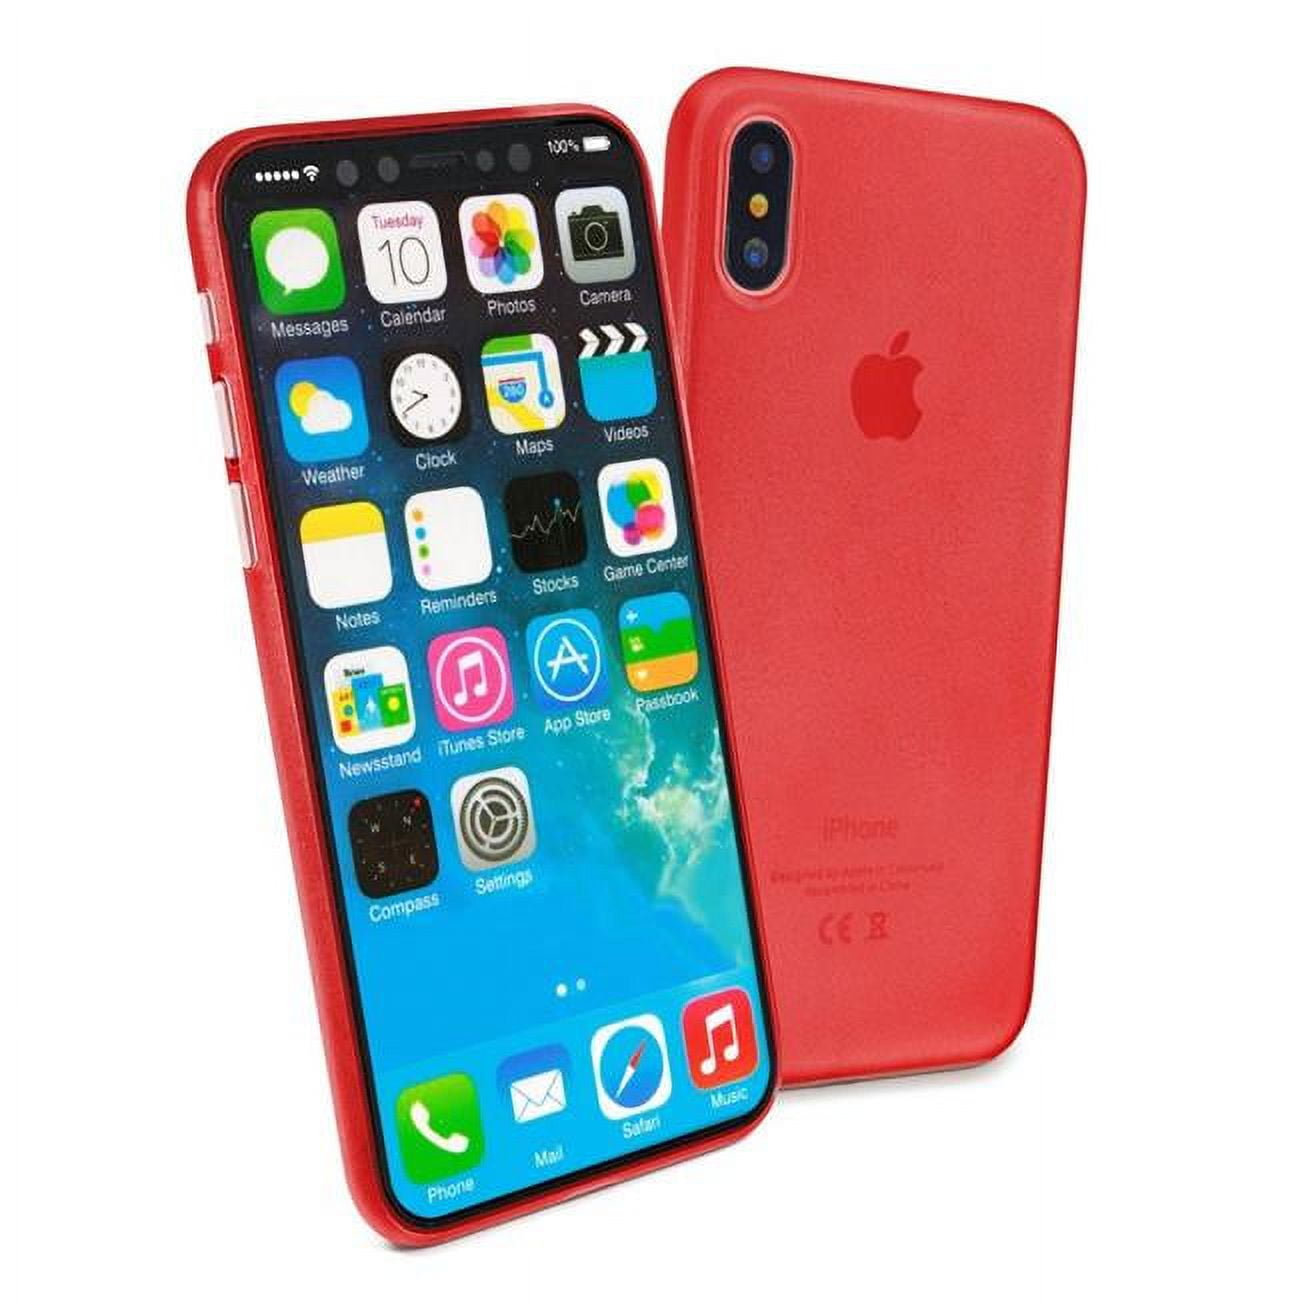 Picture of Tuff-luv B10-97 Rigid Ultra-thin & Light Weight Skin Case Cover for Apple iPhone X, Red